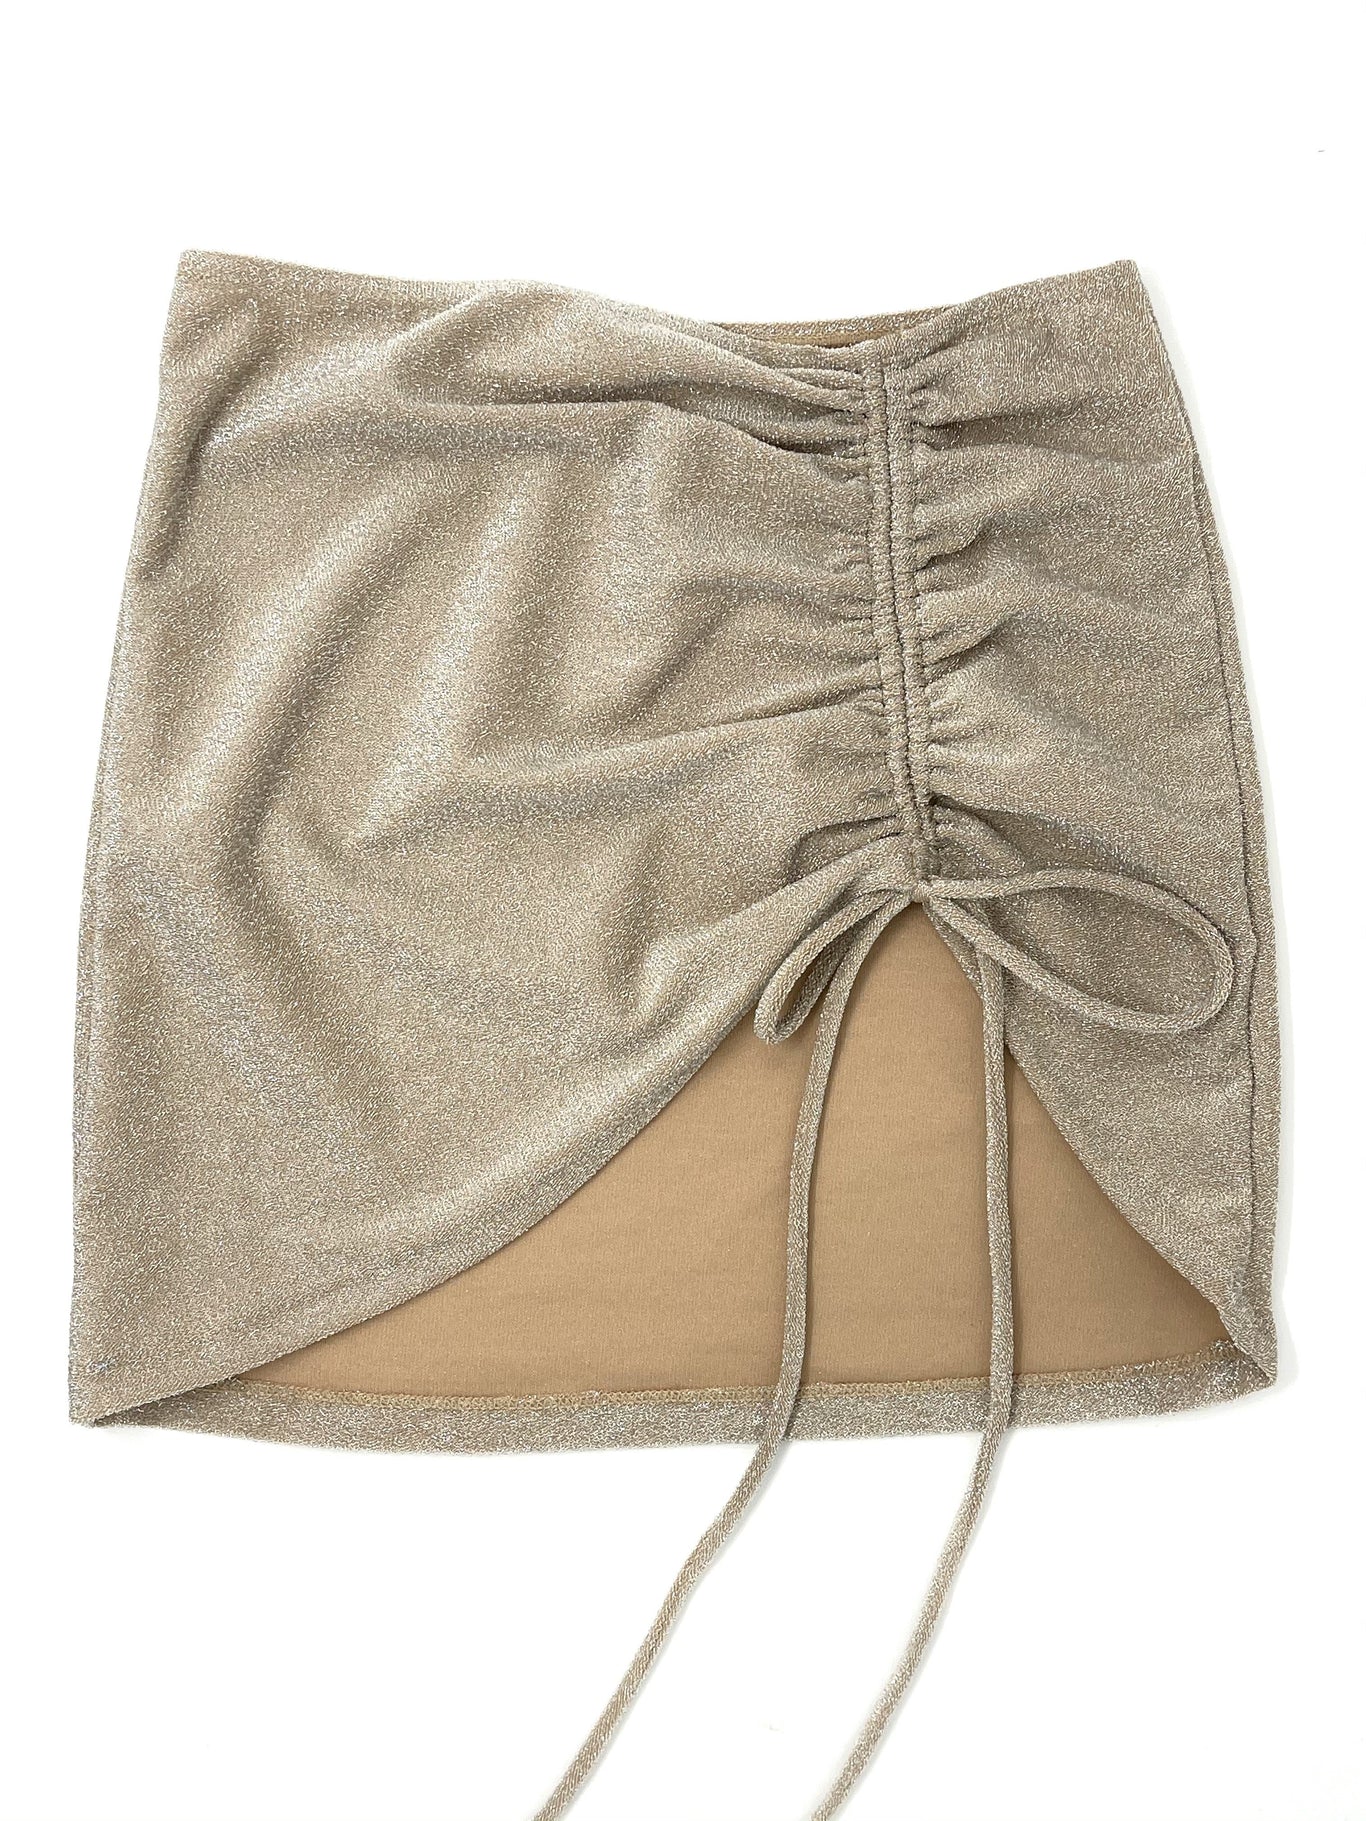 BRIELLE COVER UP SKIRT- CHAMPAGNE